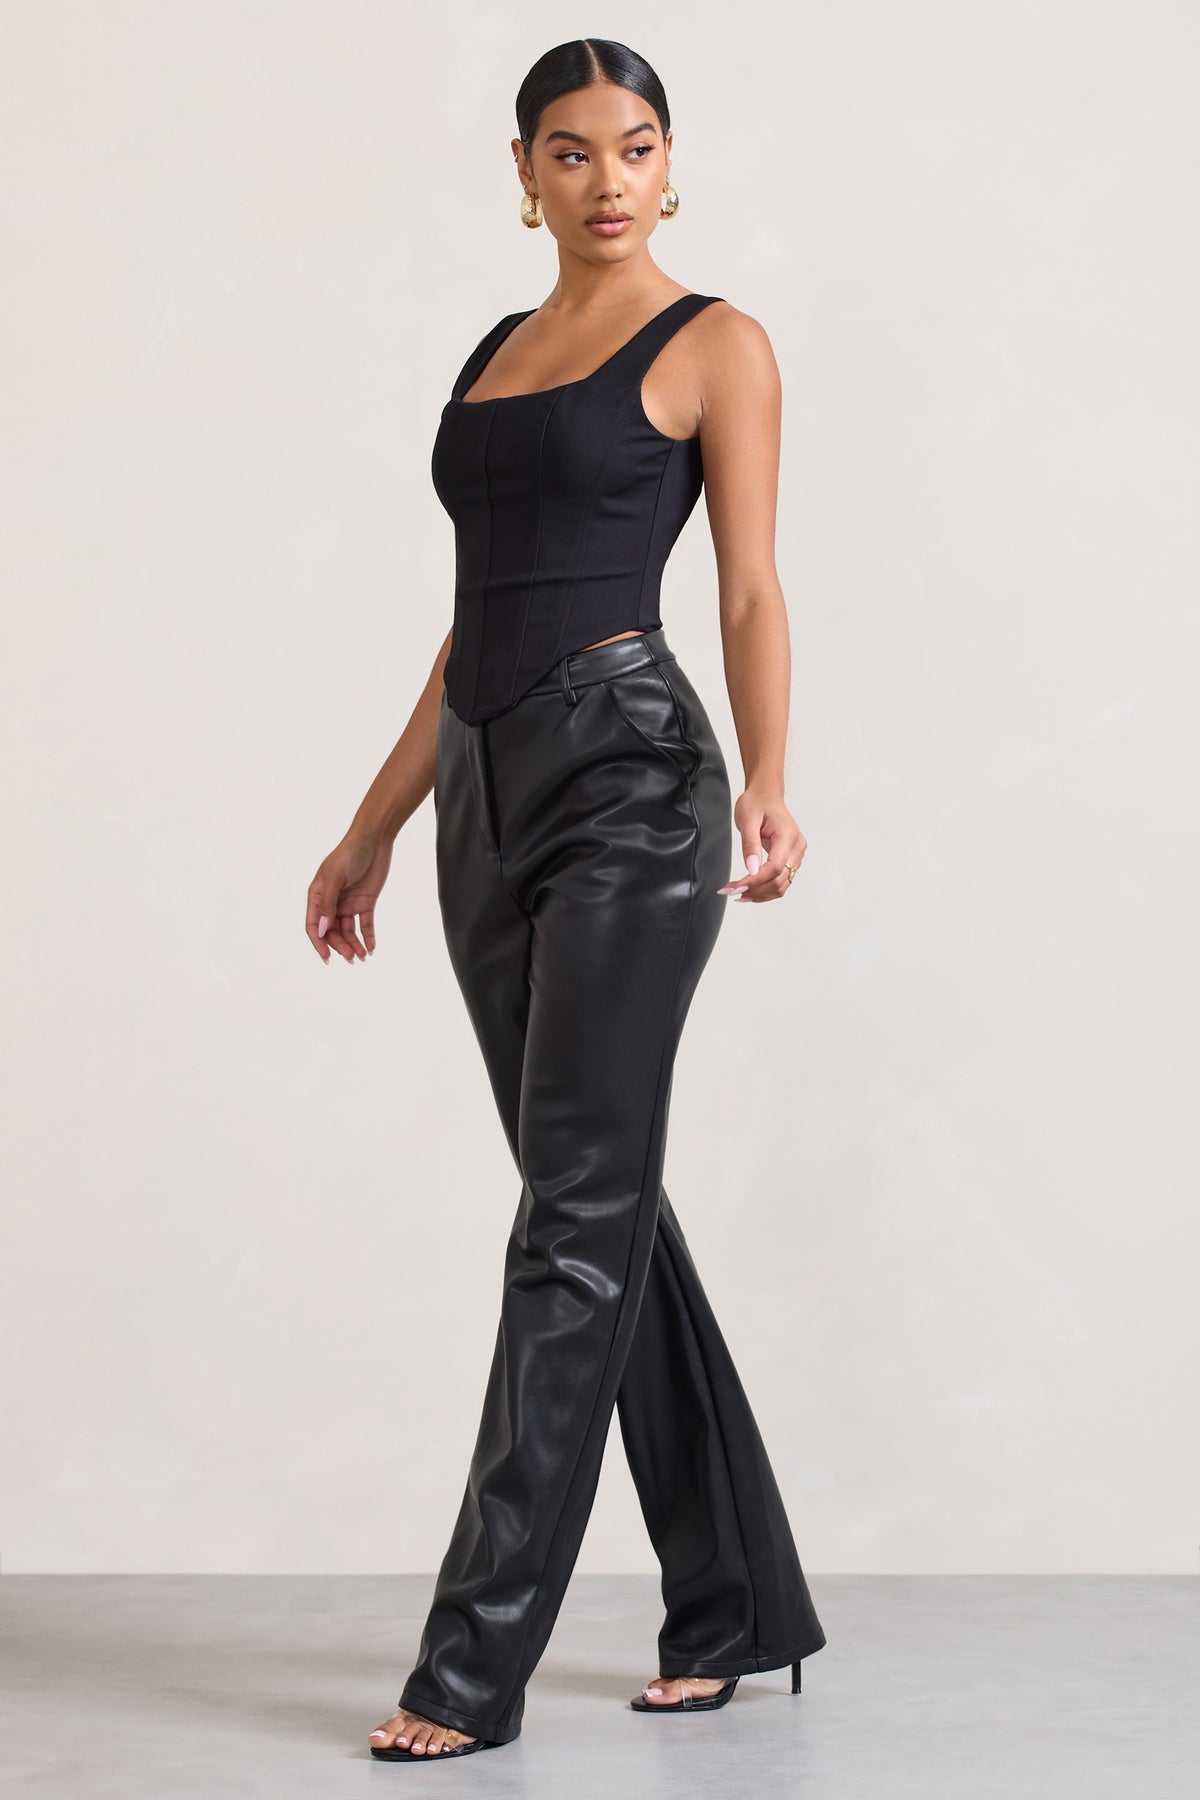 Billie Black Faux Leather Tailored Straight-Leg Trousers – Club L